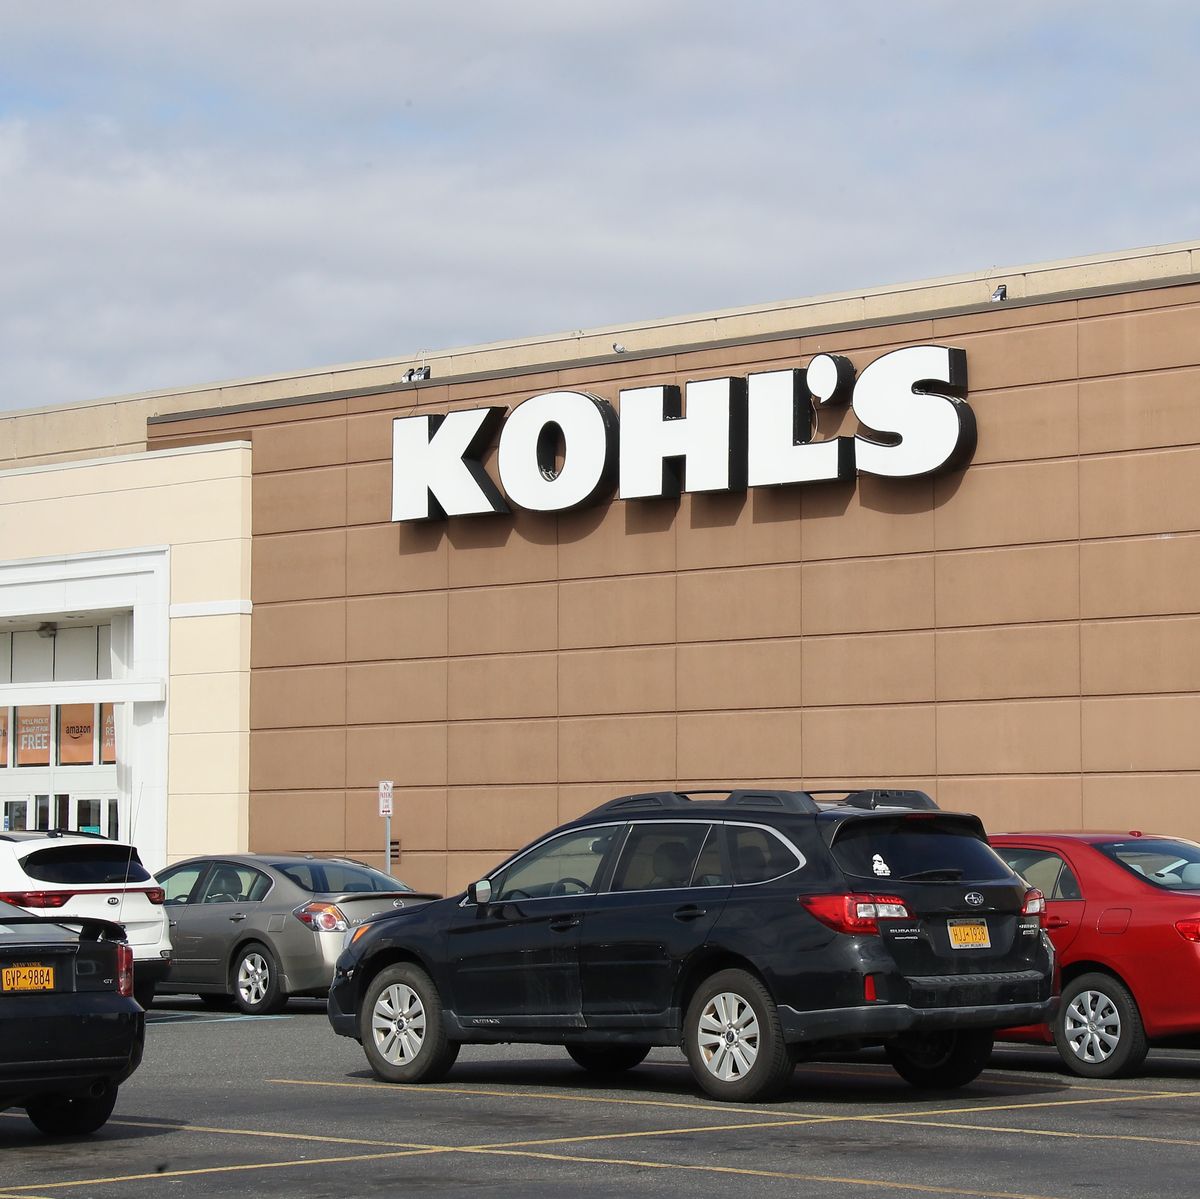 Kohl's Recalls Three-Wick SONOMA Goods For Life Branded Candles Due to Fire  and Burn Hazards